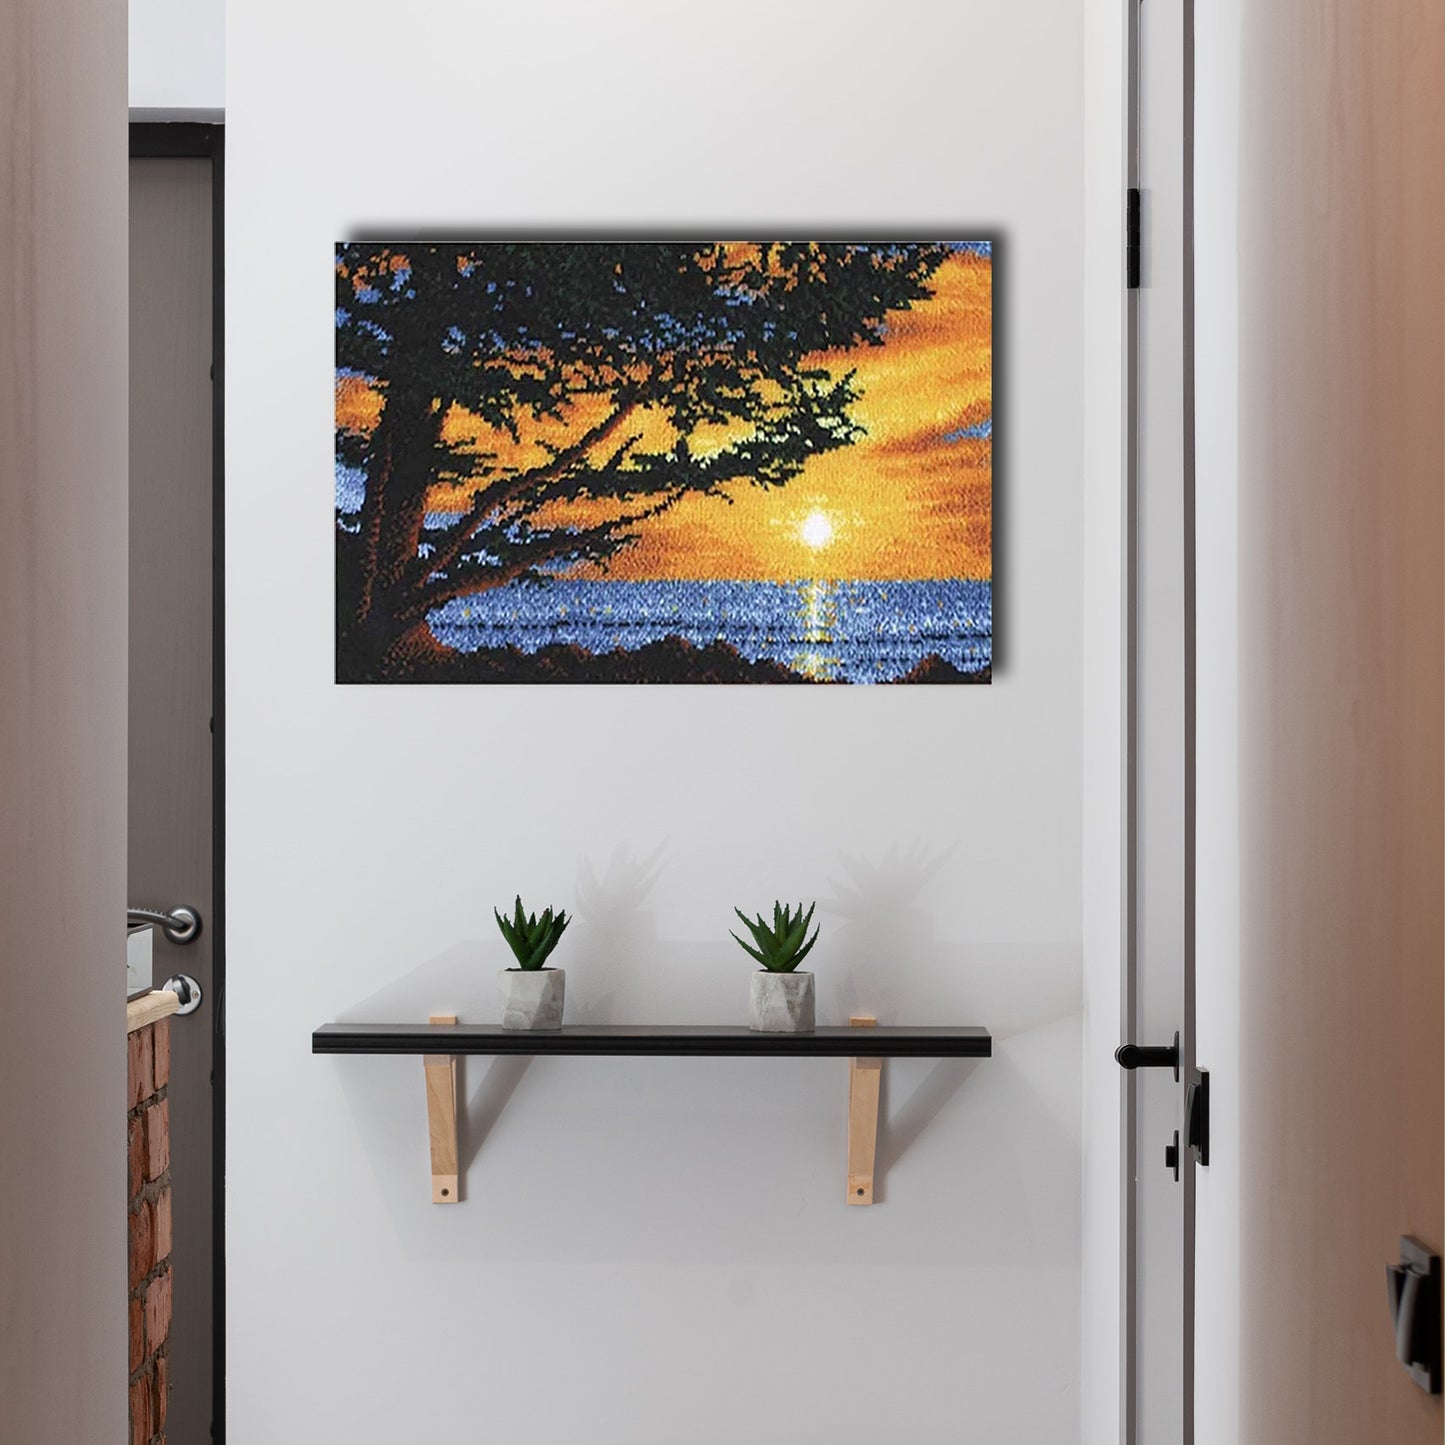 Sunset Tree Latch Hook Rug Kits for Adults, Rug size 23.6"X15.8"/60x40 cm